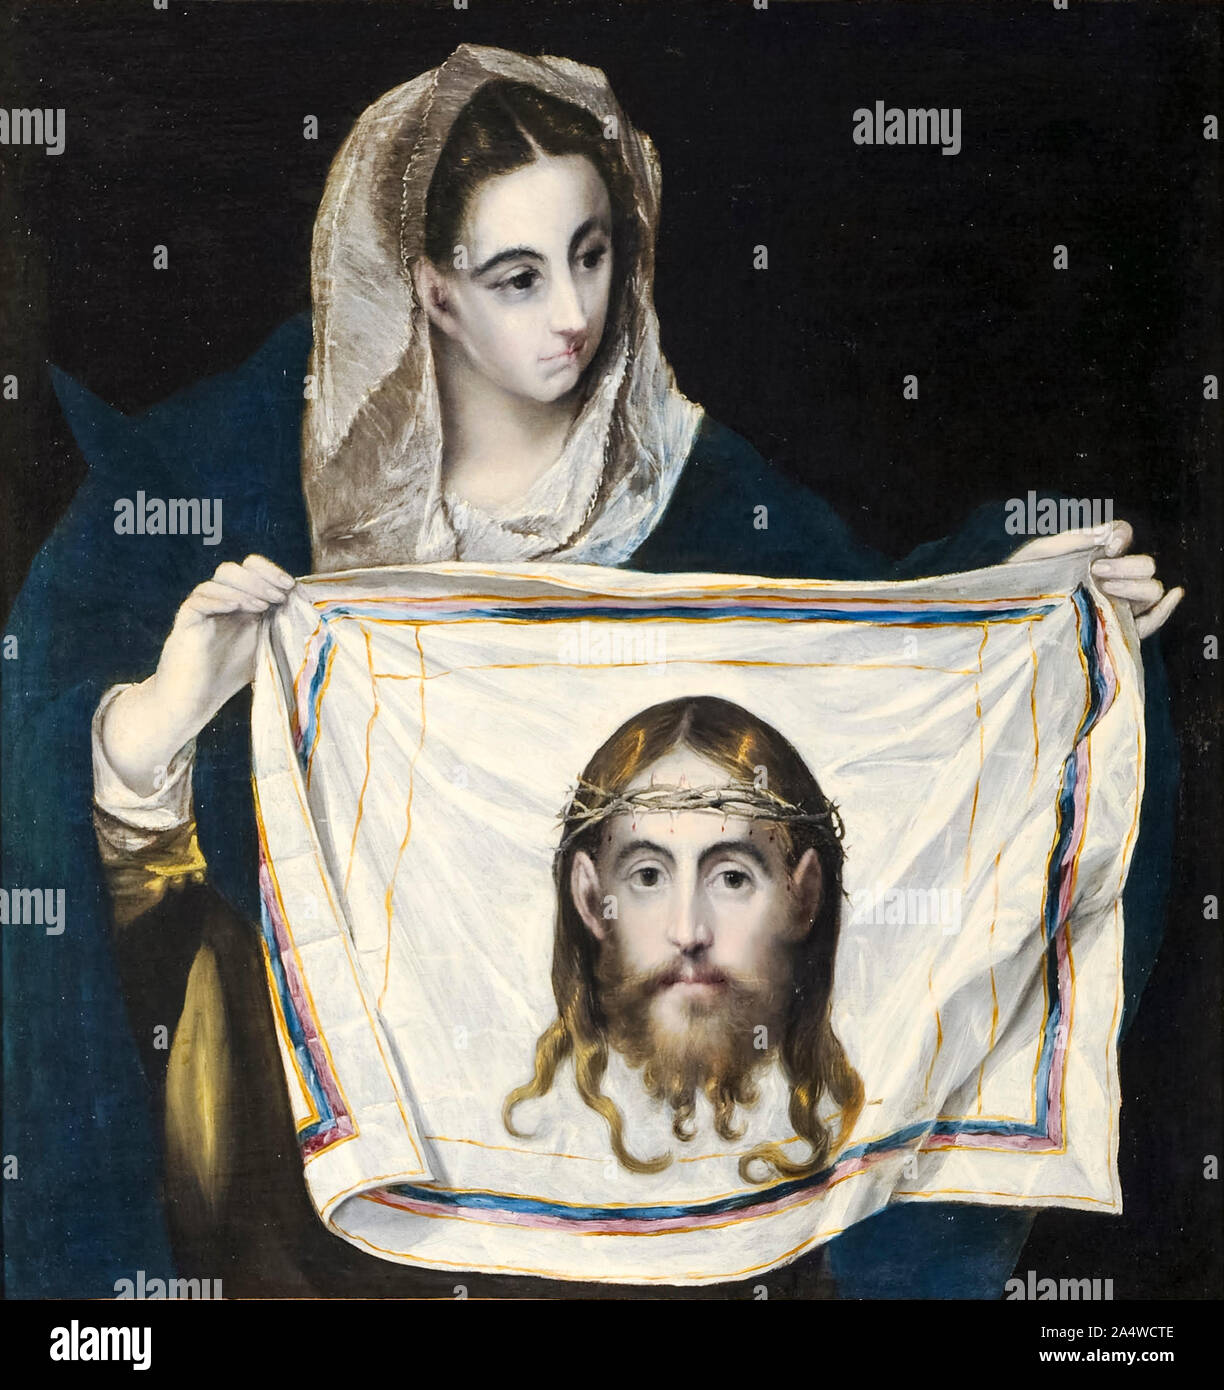 El Greco, Saint Veronica holding the veil, (showing the face of Jesus Christ), painting, circa 1580 Stock Photo